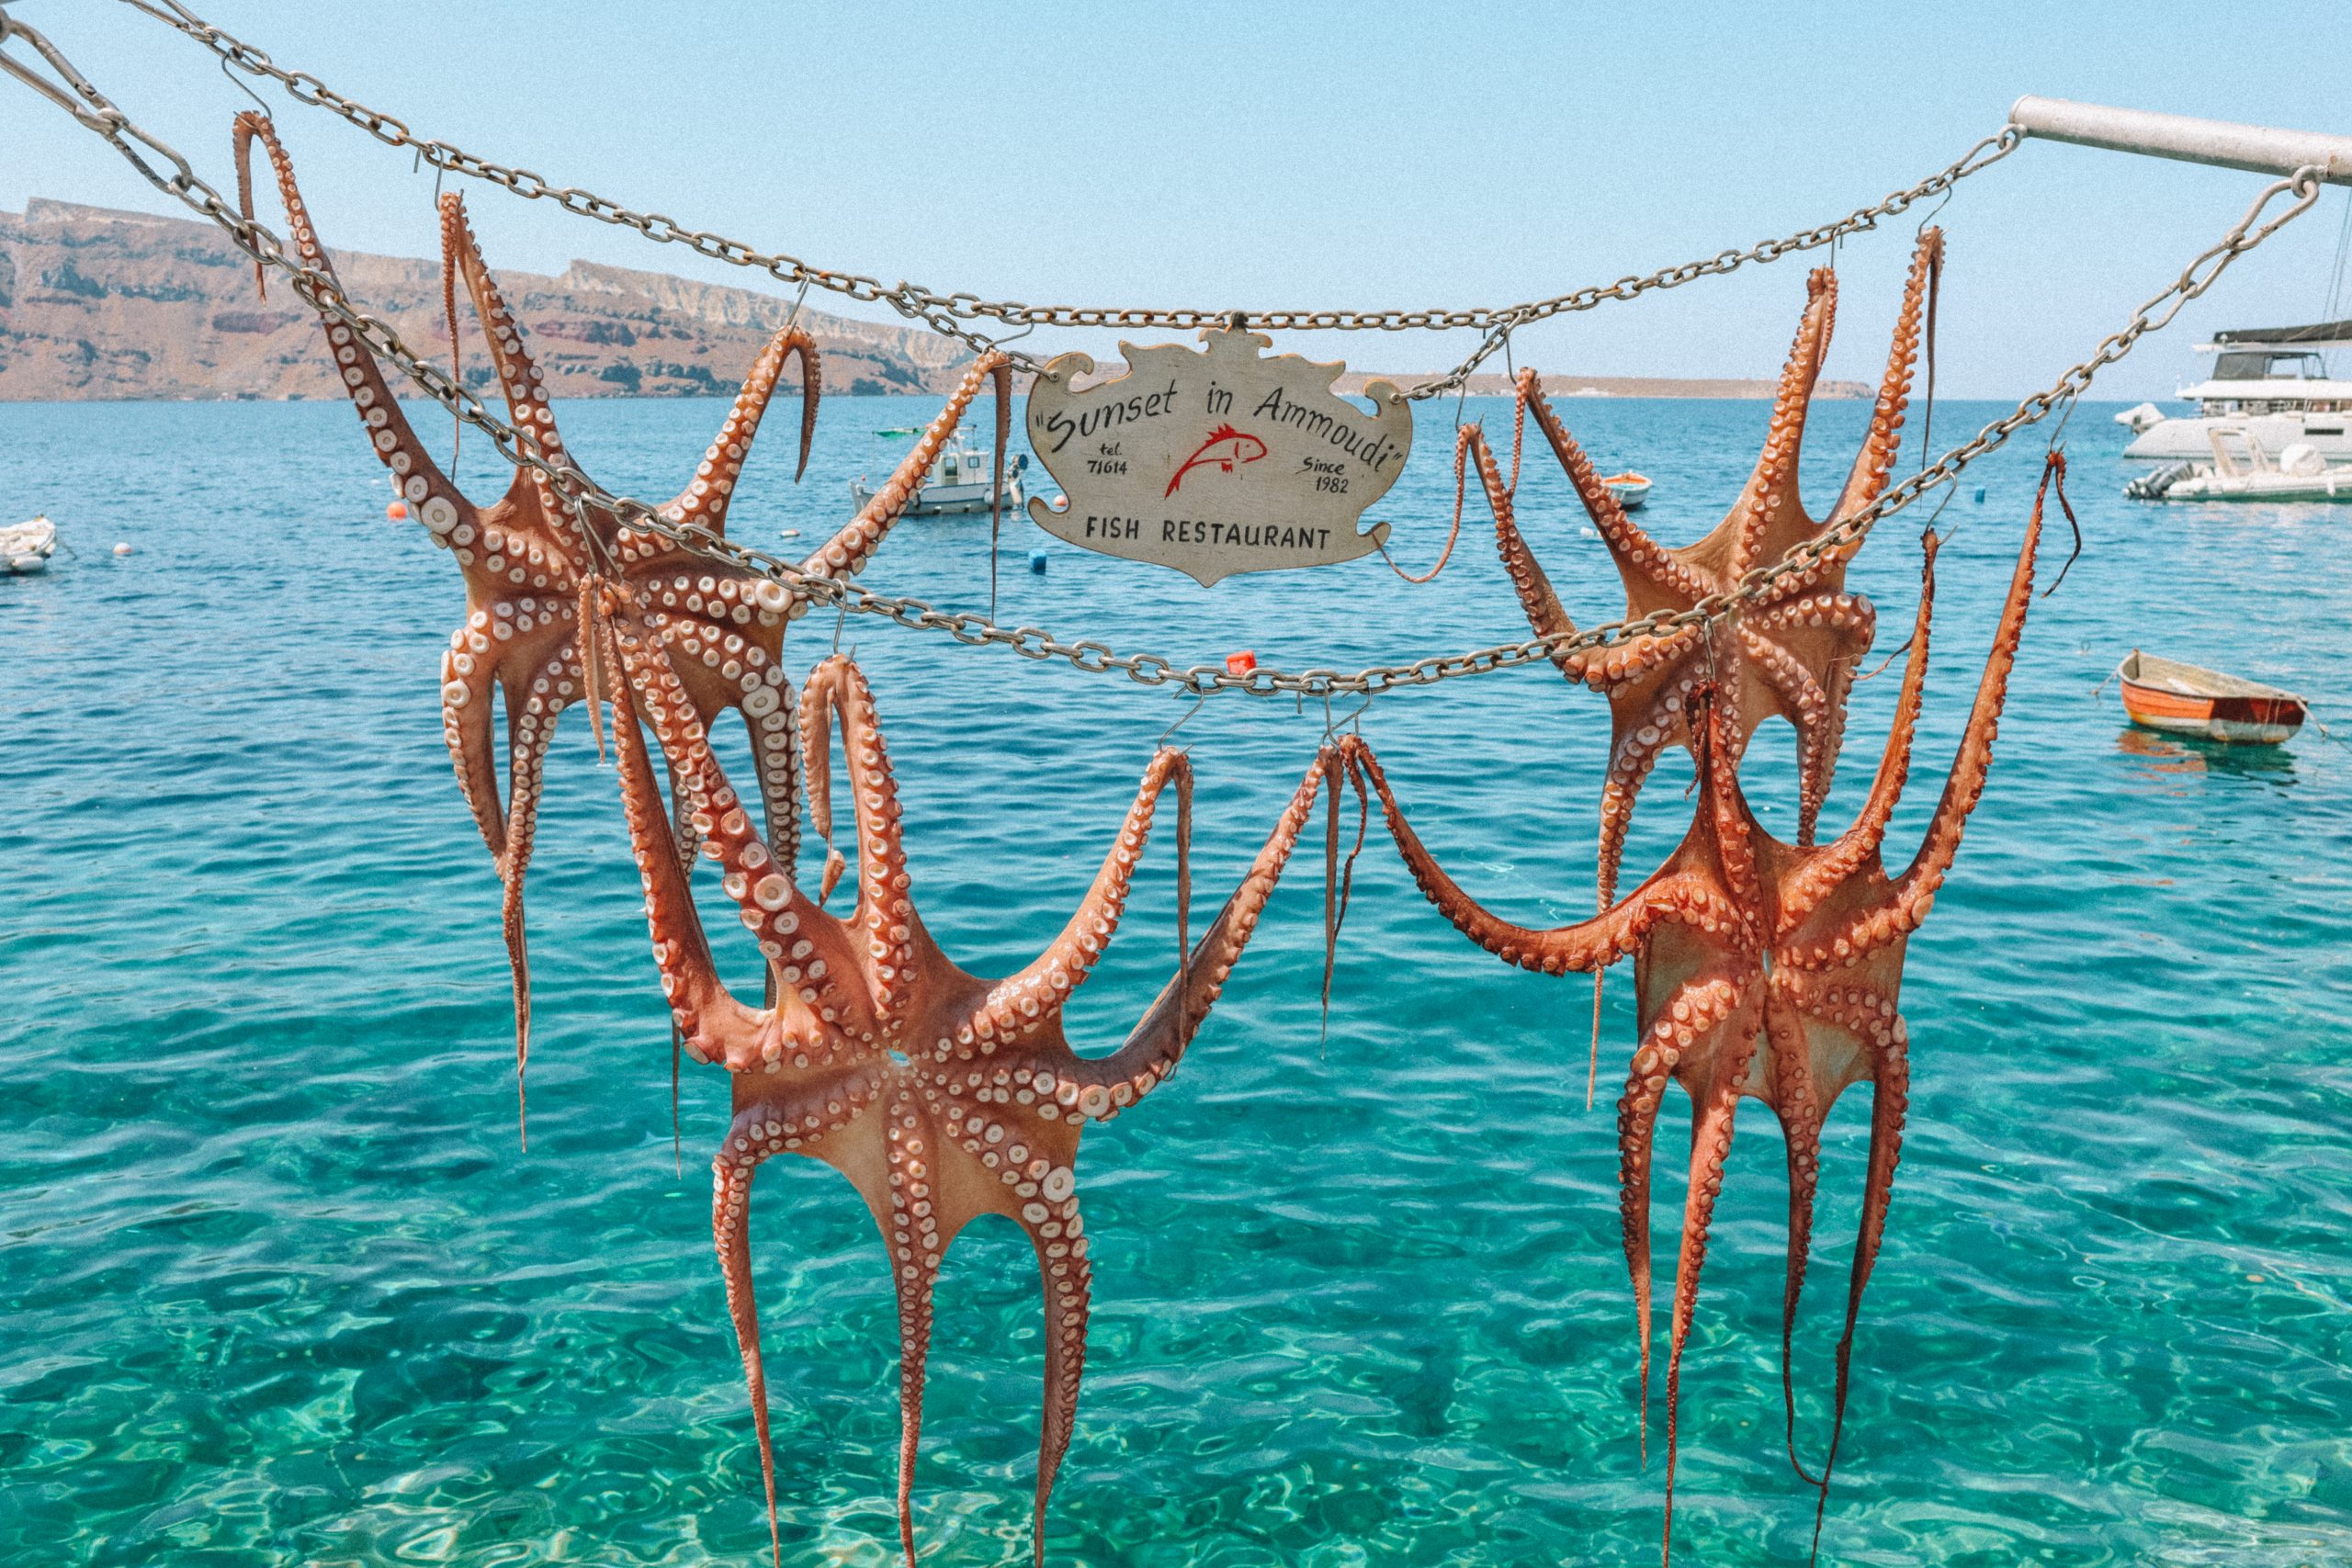 Octopuses drying out before being ready to be eaten with turquoise waters in the background